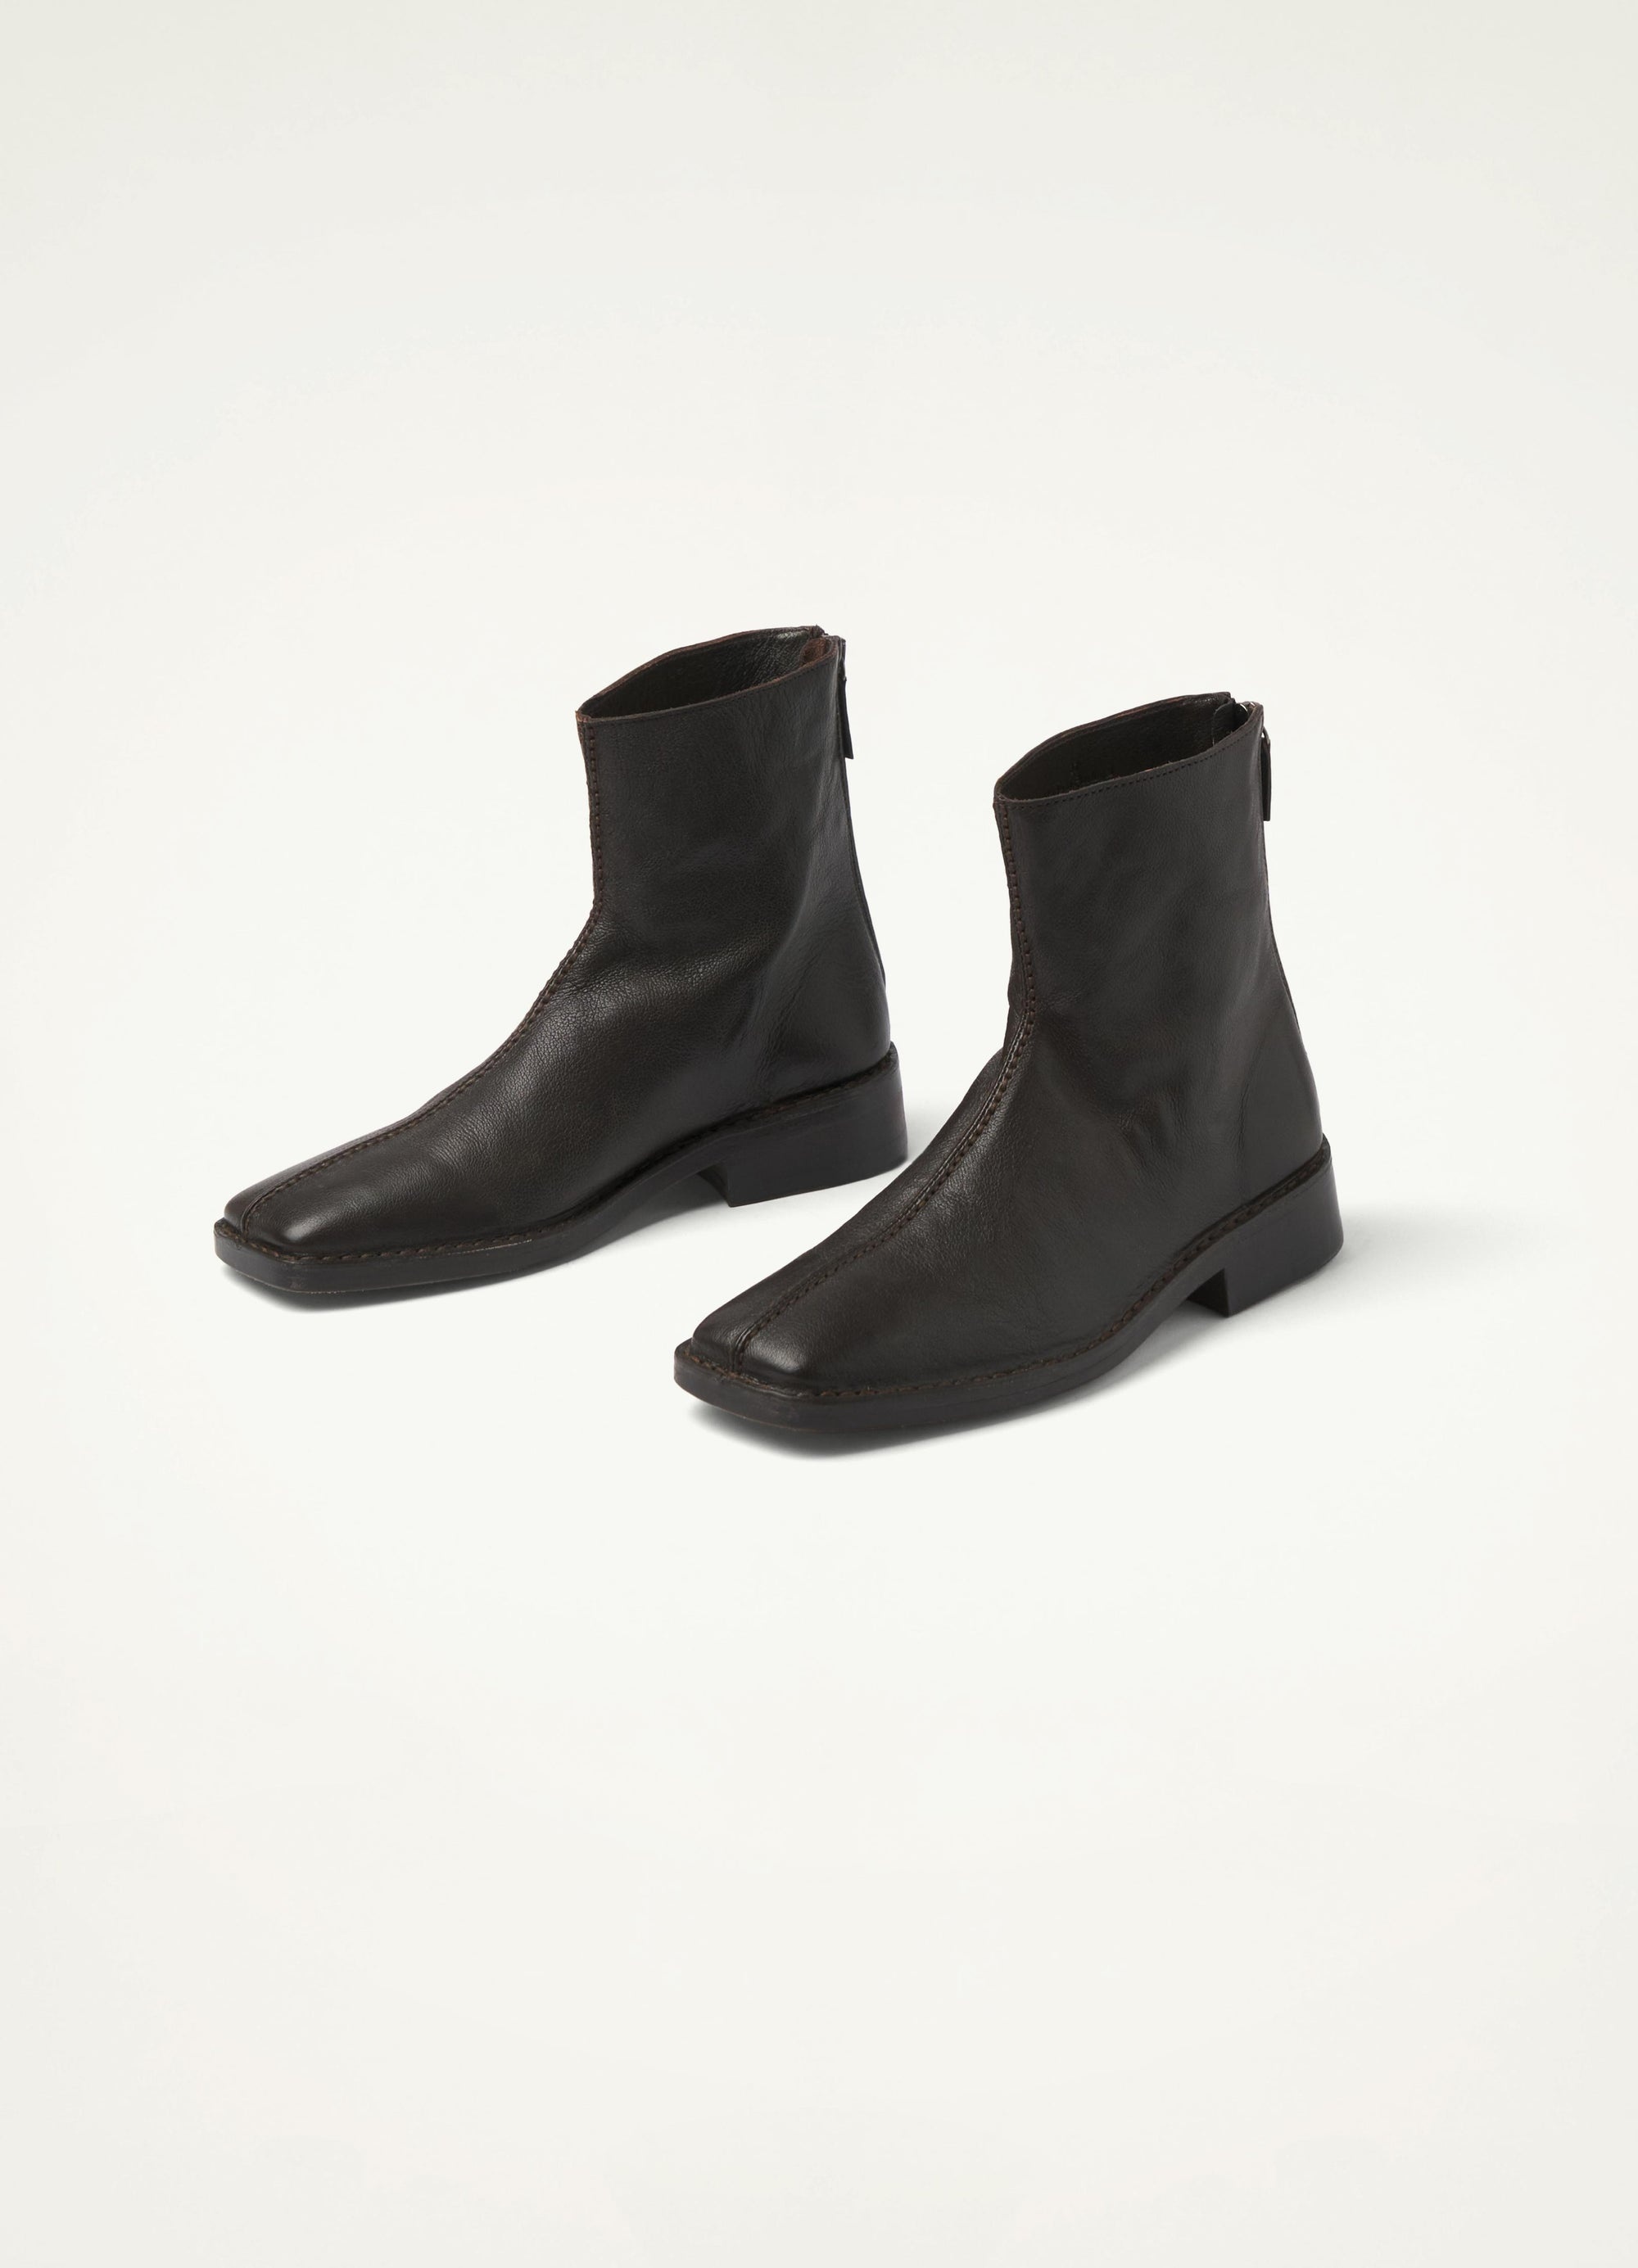 PIPED ZIPPED BOOTS
SOFT LEATHER - 6